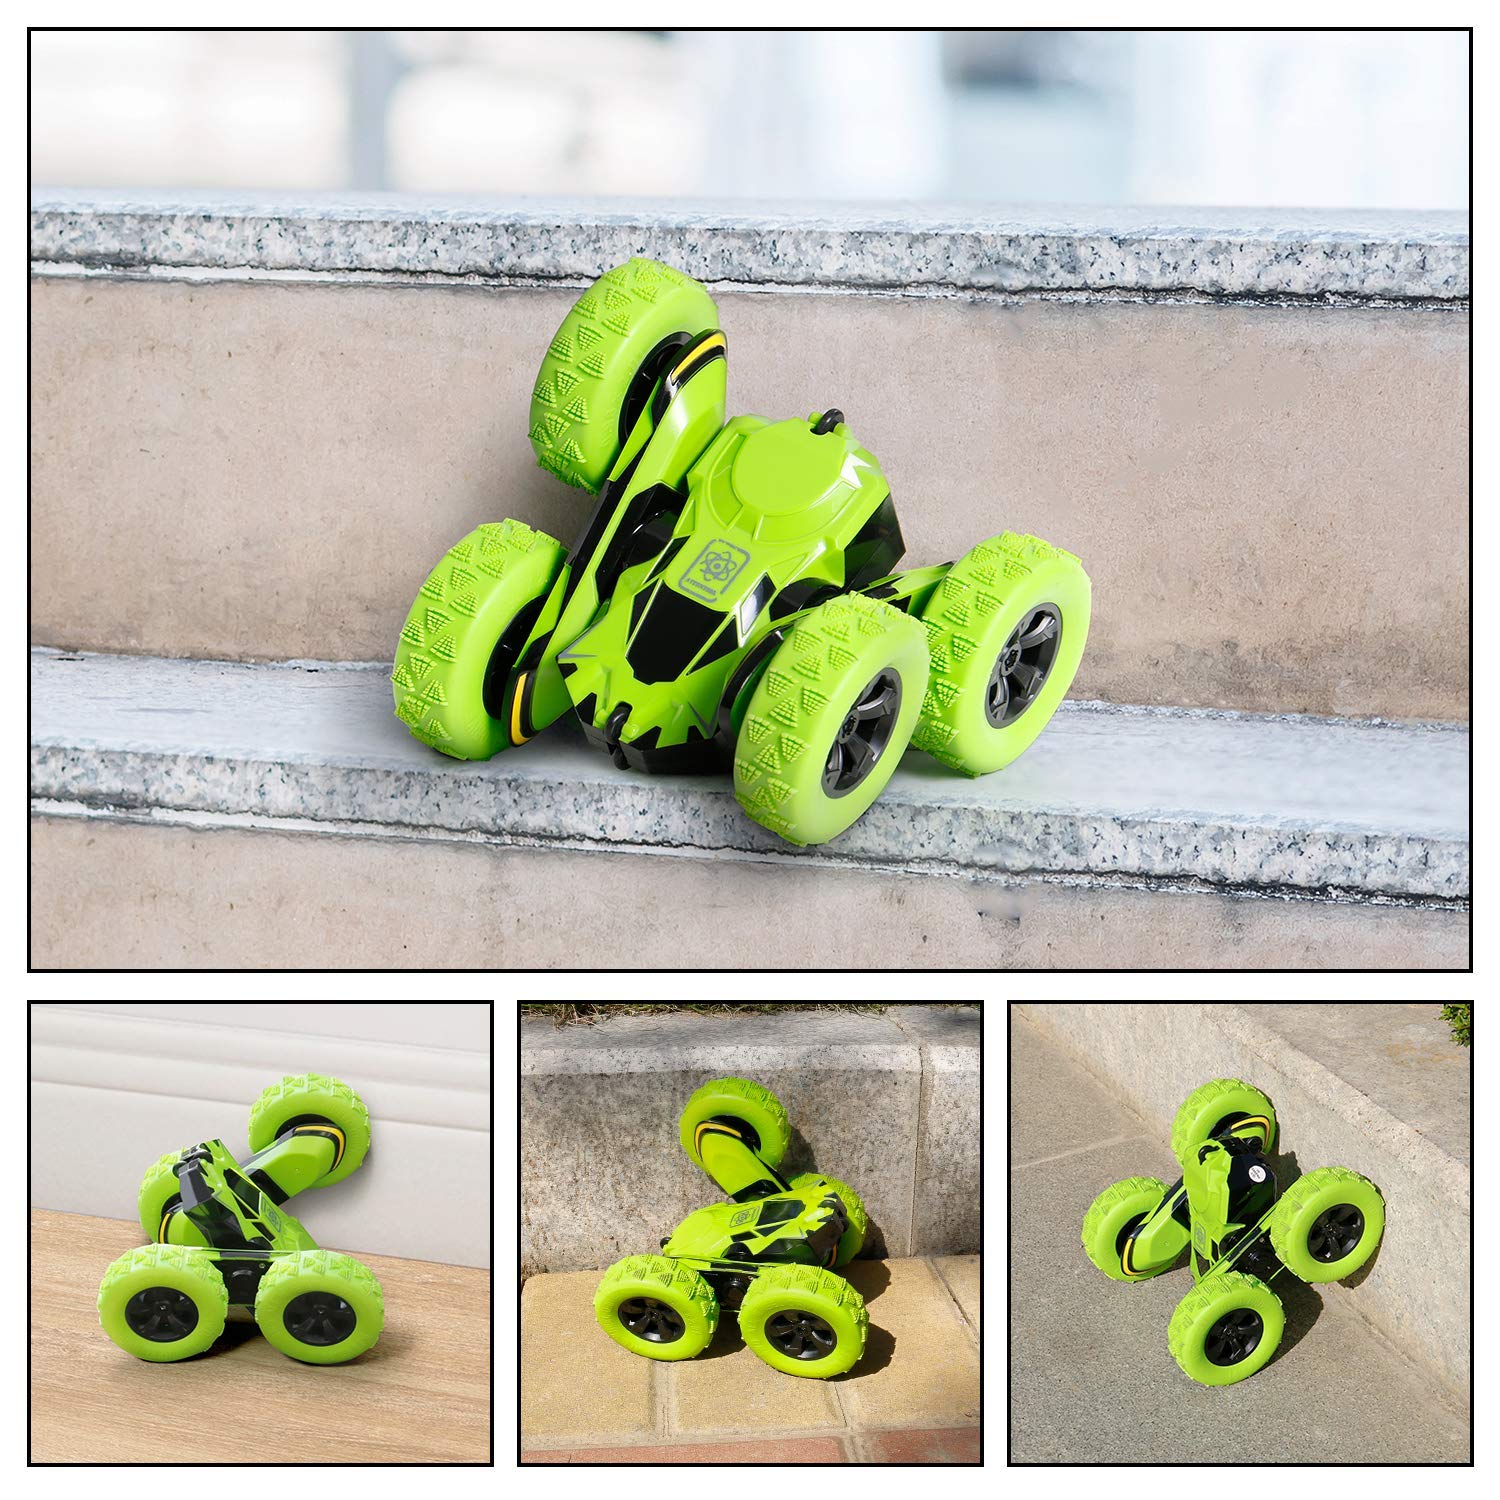 SGILE RC Stunt Car Toy, Remote Control Car with 2 Sided 360 Rotation for Boy Kids Girl, Green